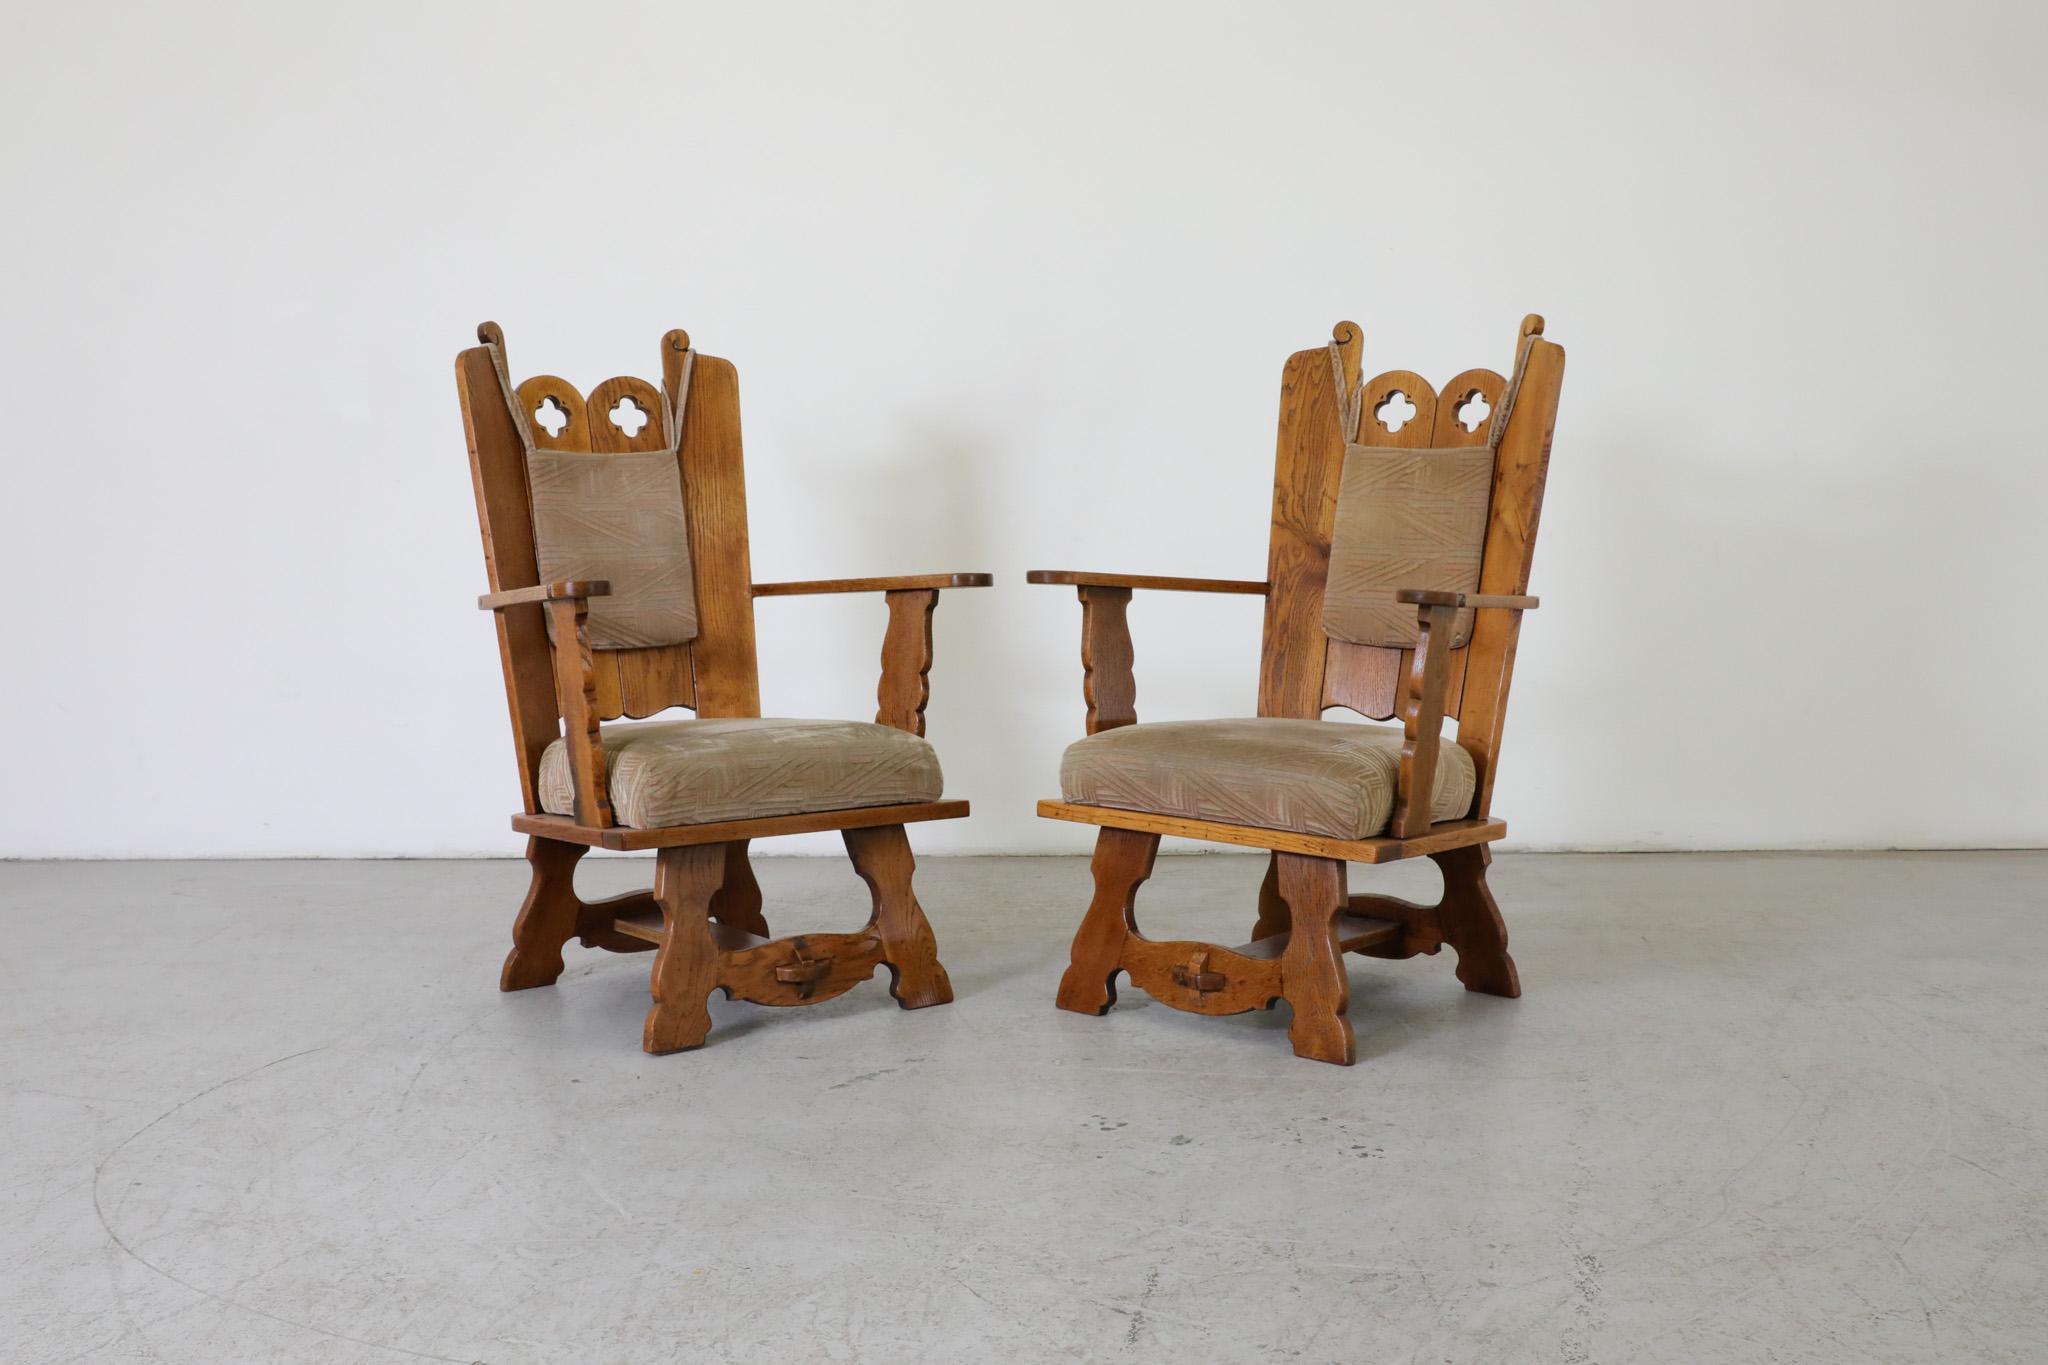 Early 20th Century Brutalist lounge chairs with solid oak frames, beautifully carved details and original fabric cushions. Elegant high back chairs all in similar original condition with varying grain patterns. Wear is consistent with their age and